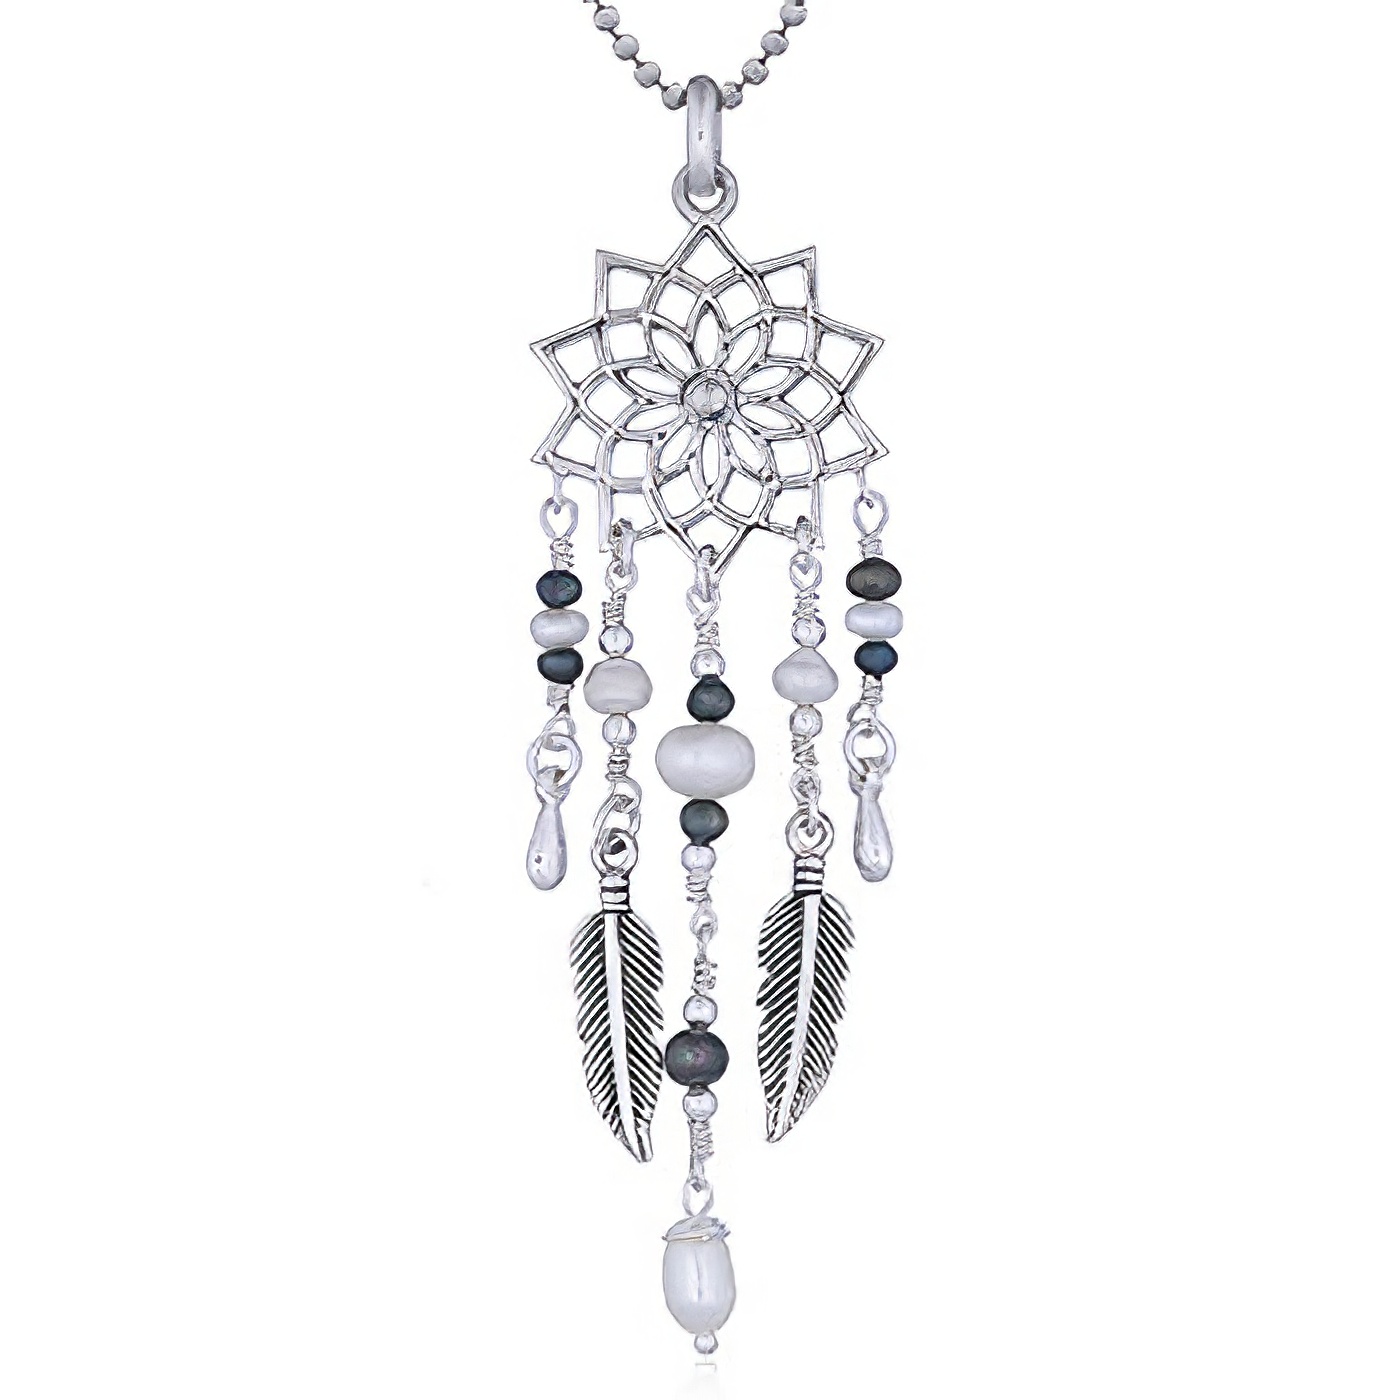 Lotus Freshwater Pendant with Pearls and Charms by BeYindi 